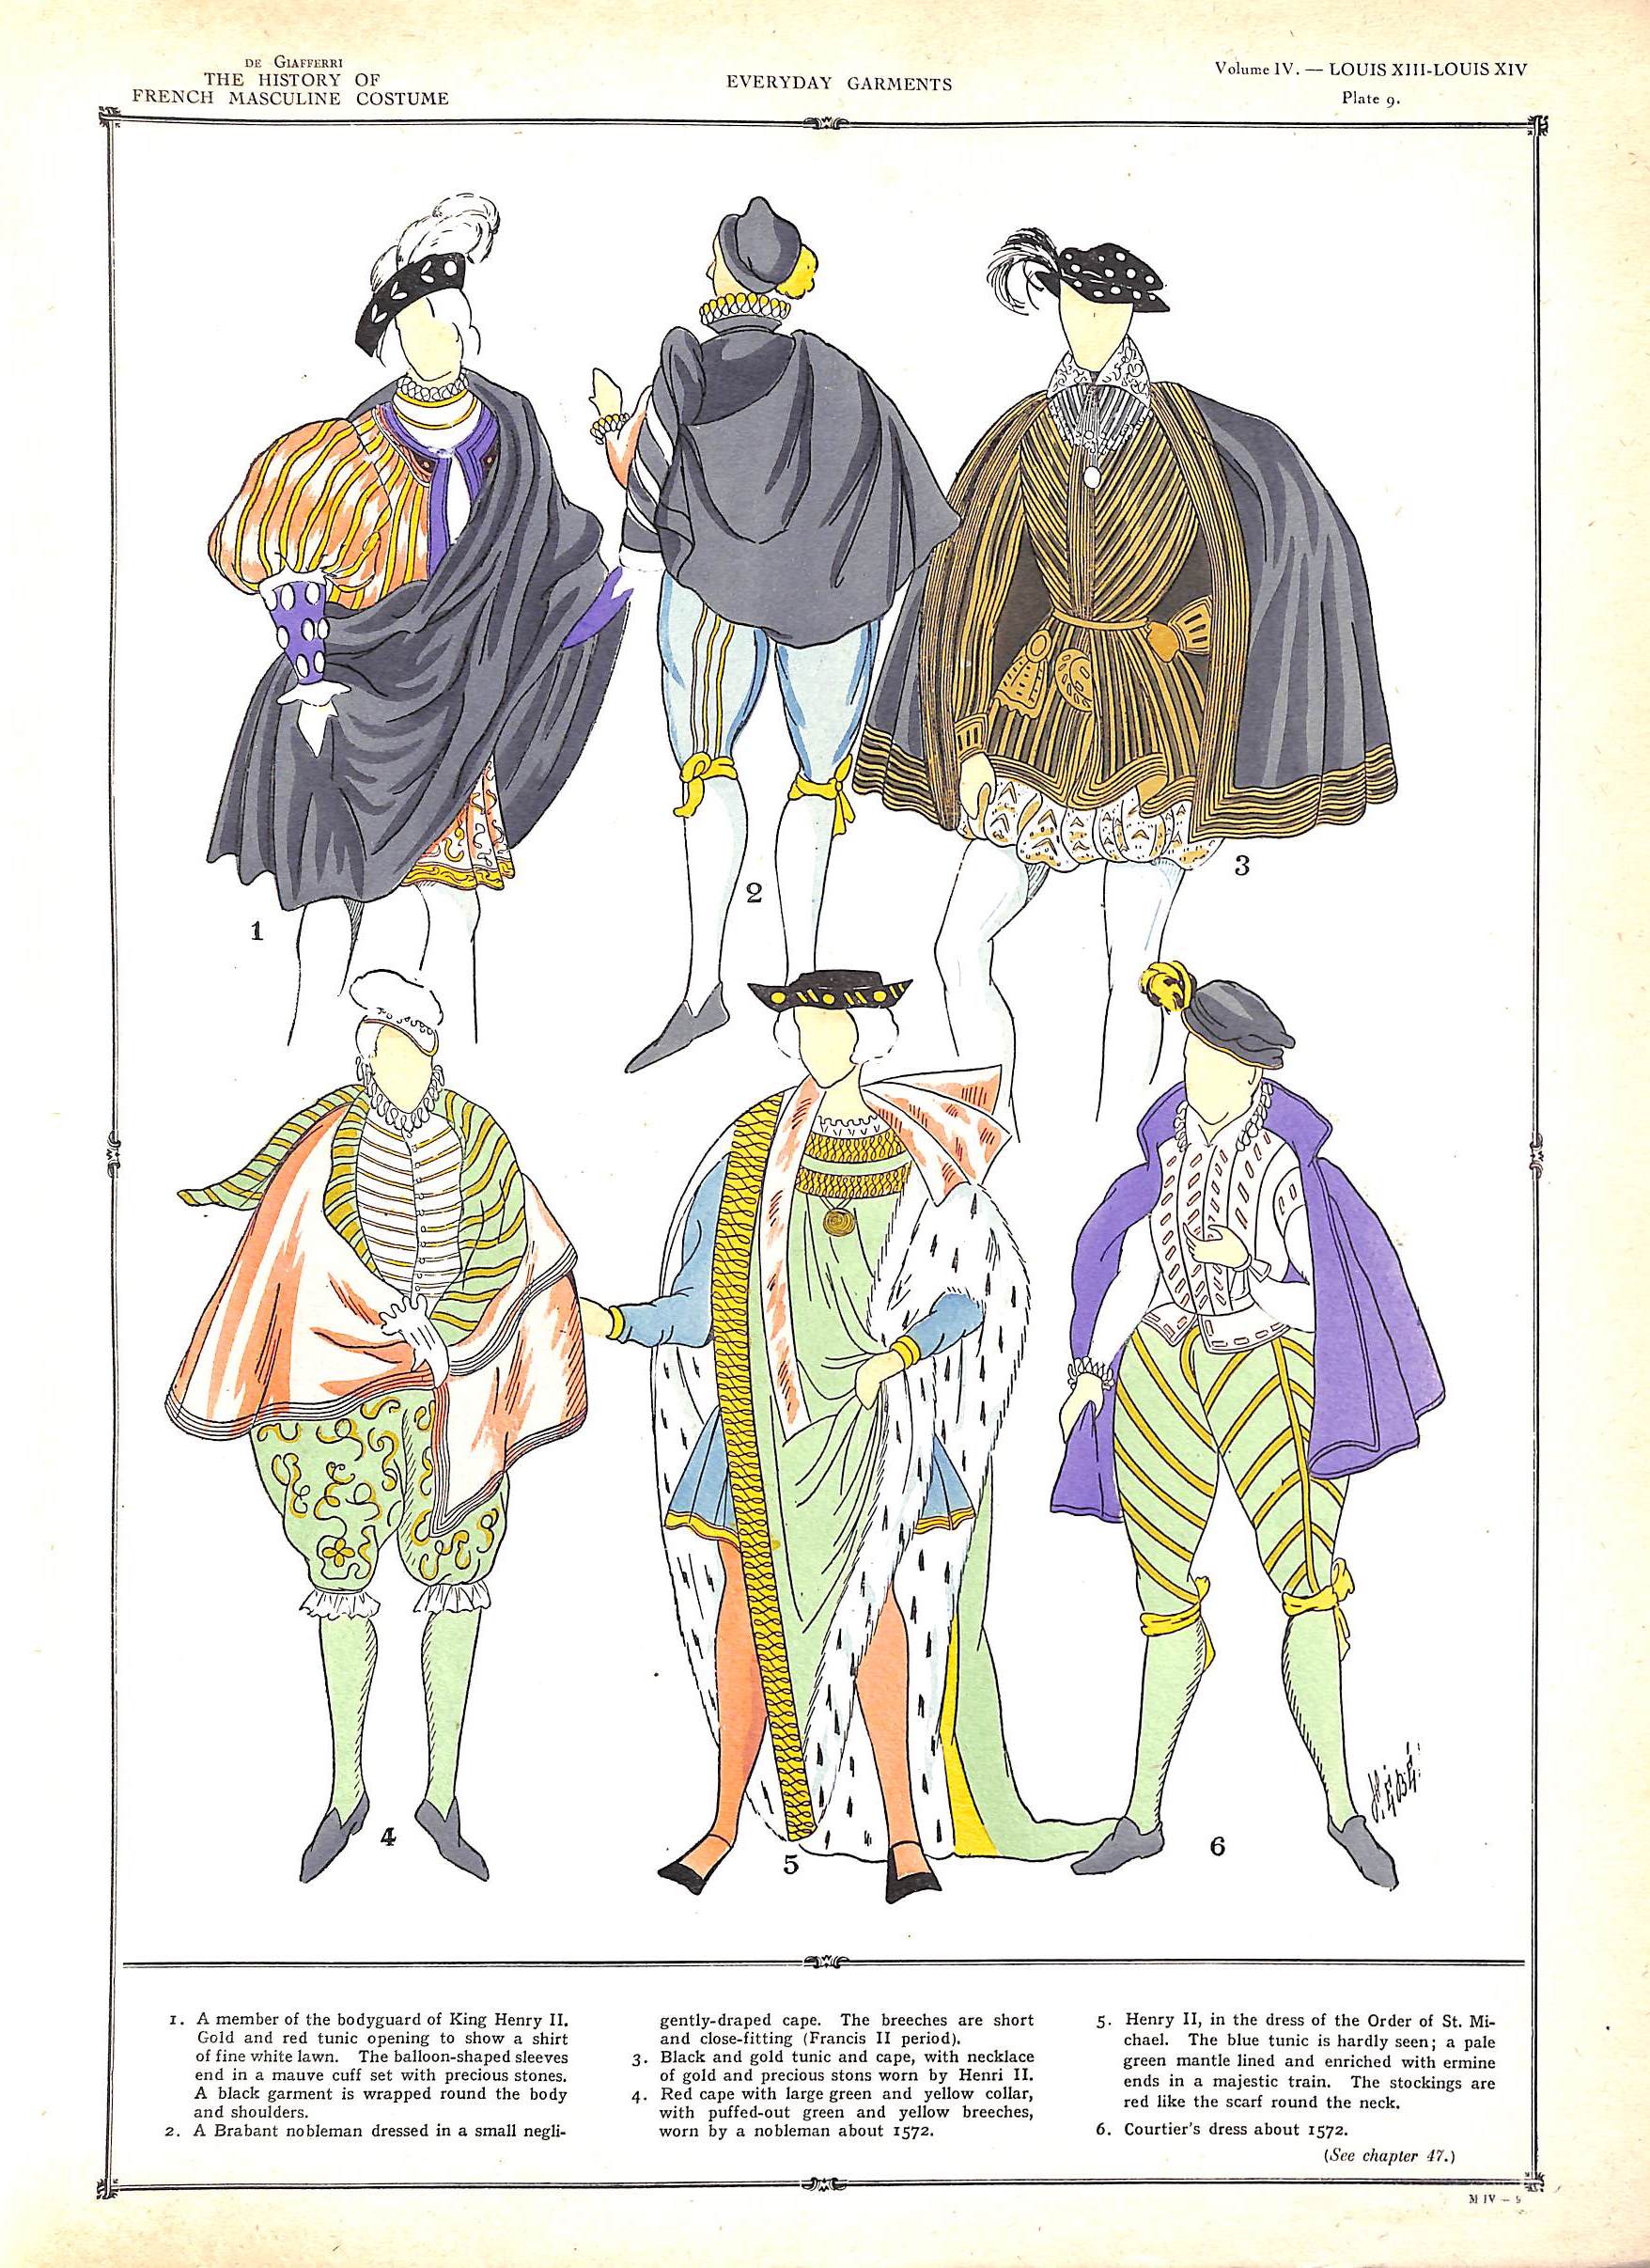 The History Of French Masculine Costume During Twenty-Four